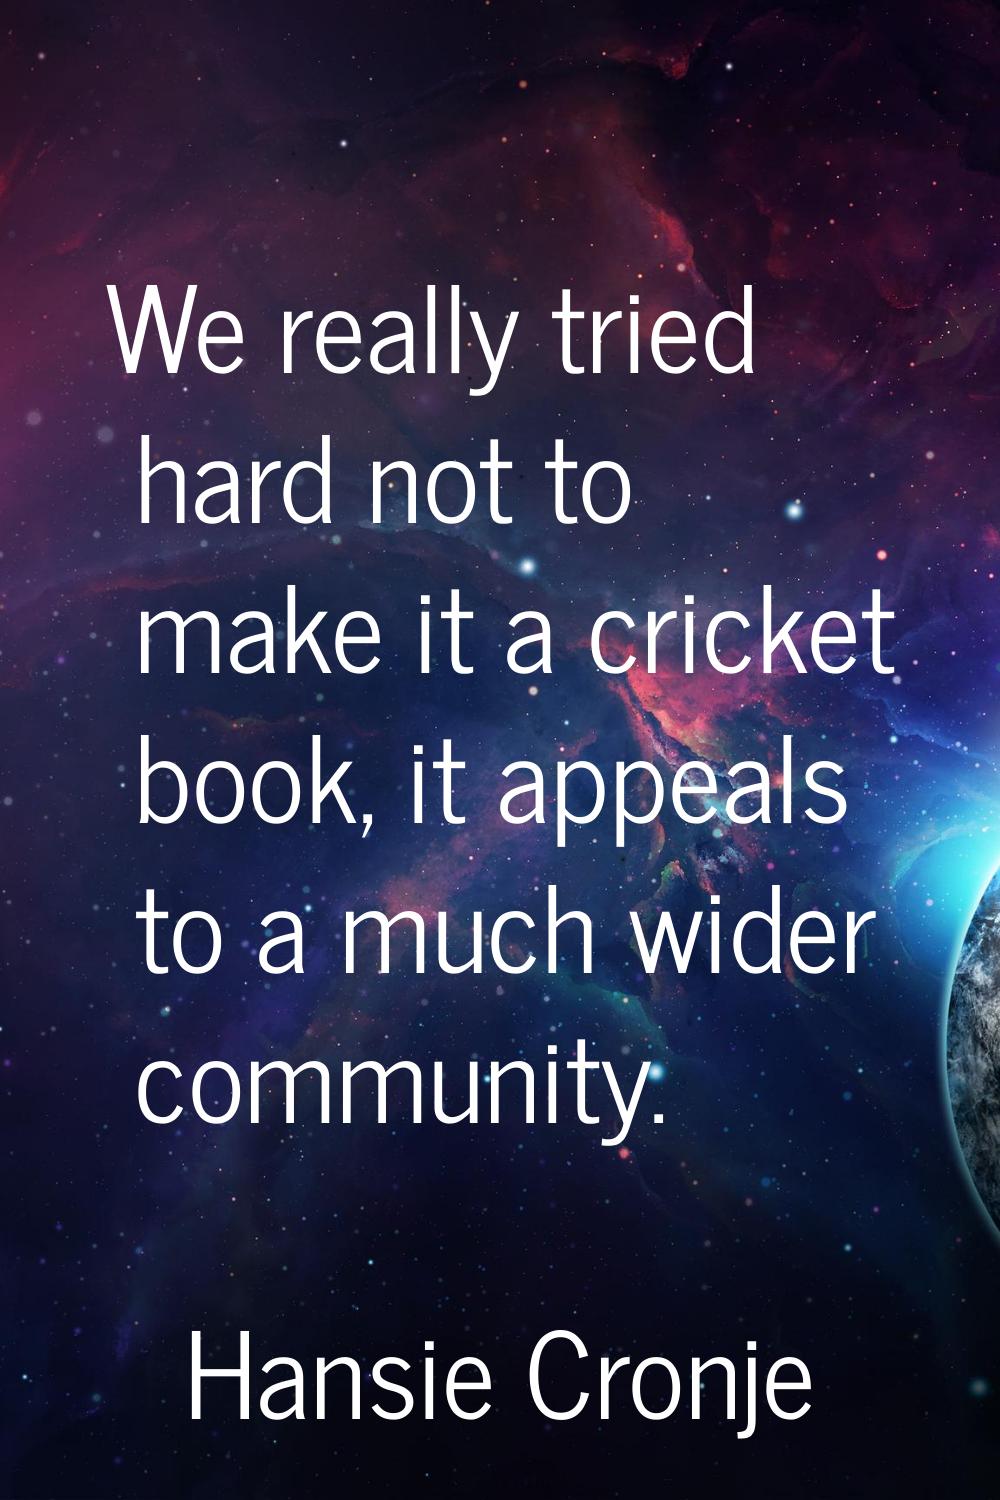 We really tried hard not to make it a cricket book, it appeals to a much wider community.